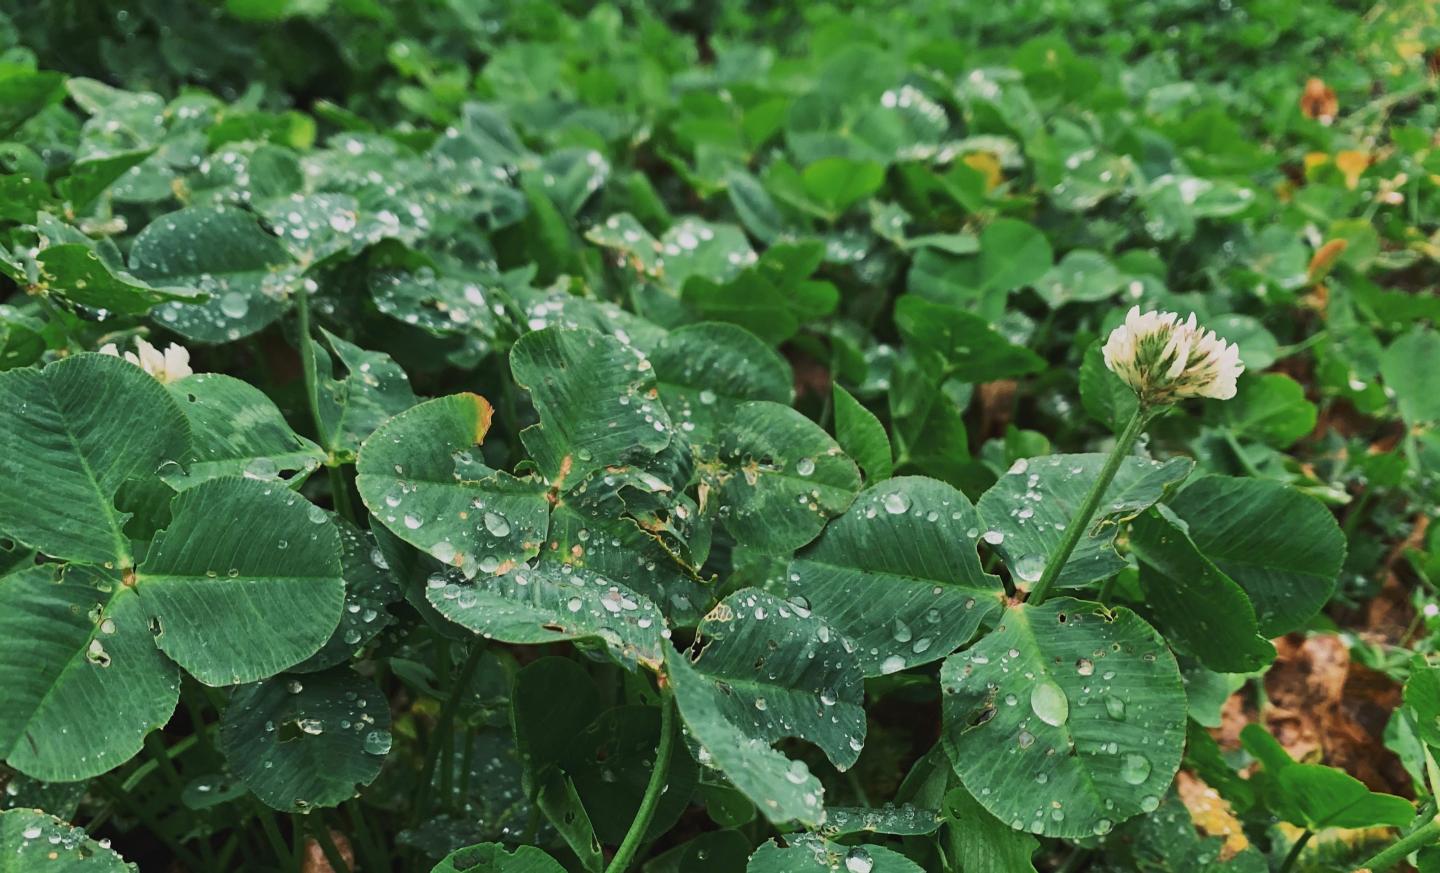 Are four leaf clovers even real? If so, where could you find them in your  backyard? - Quora